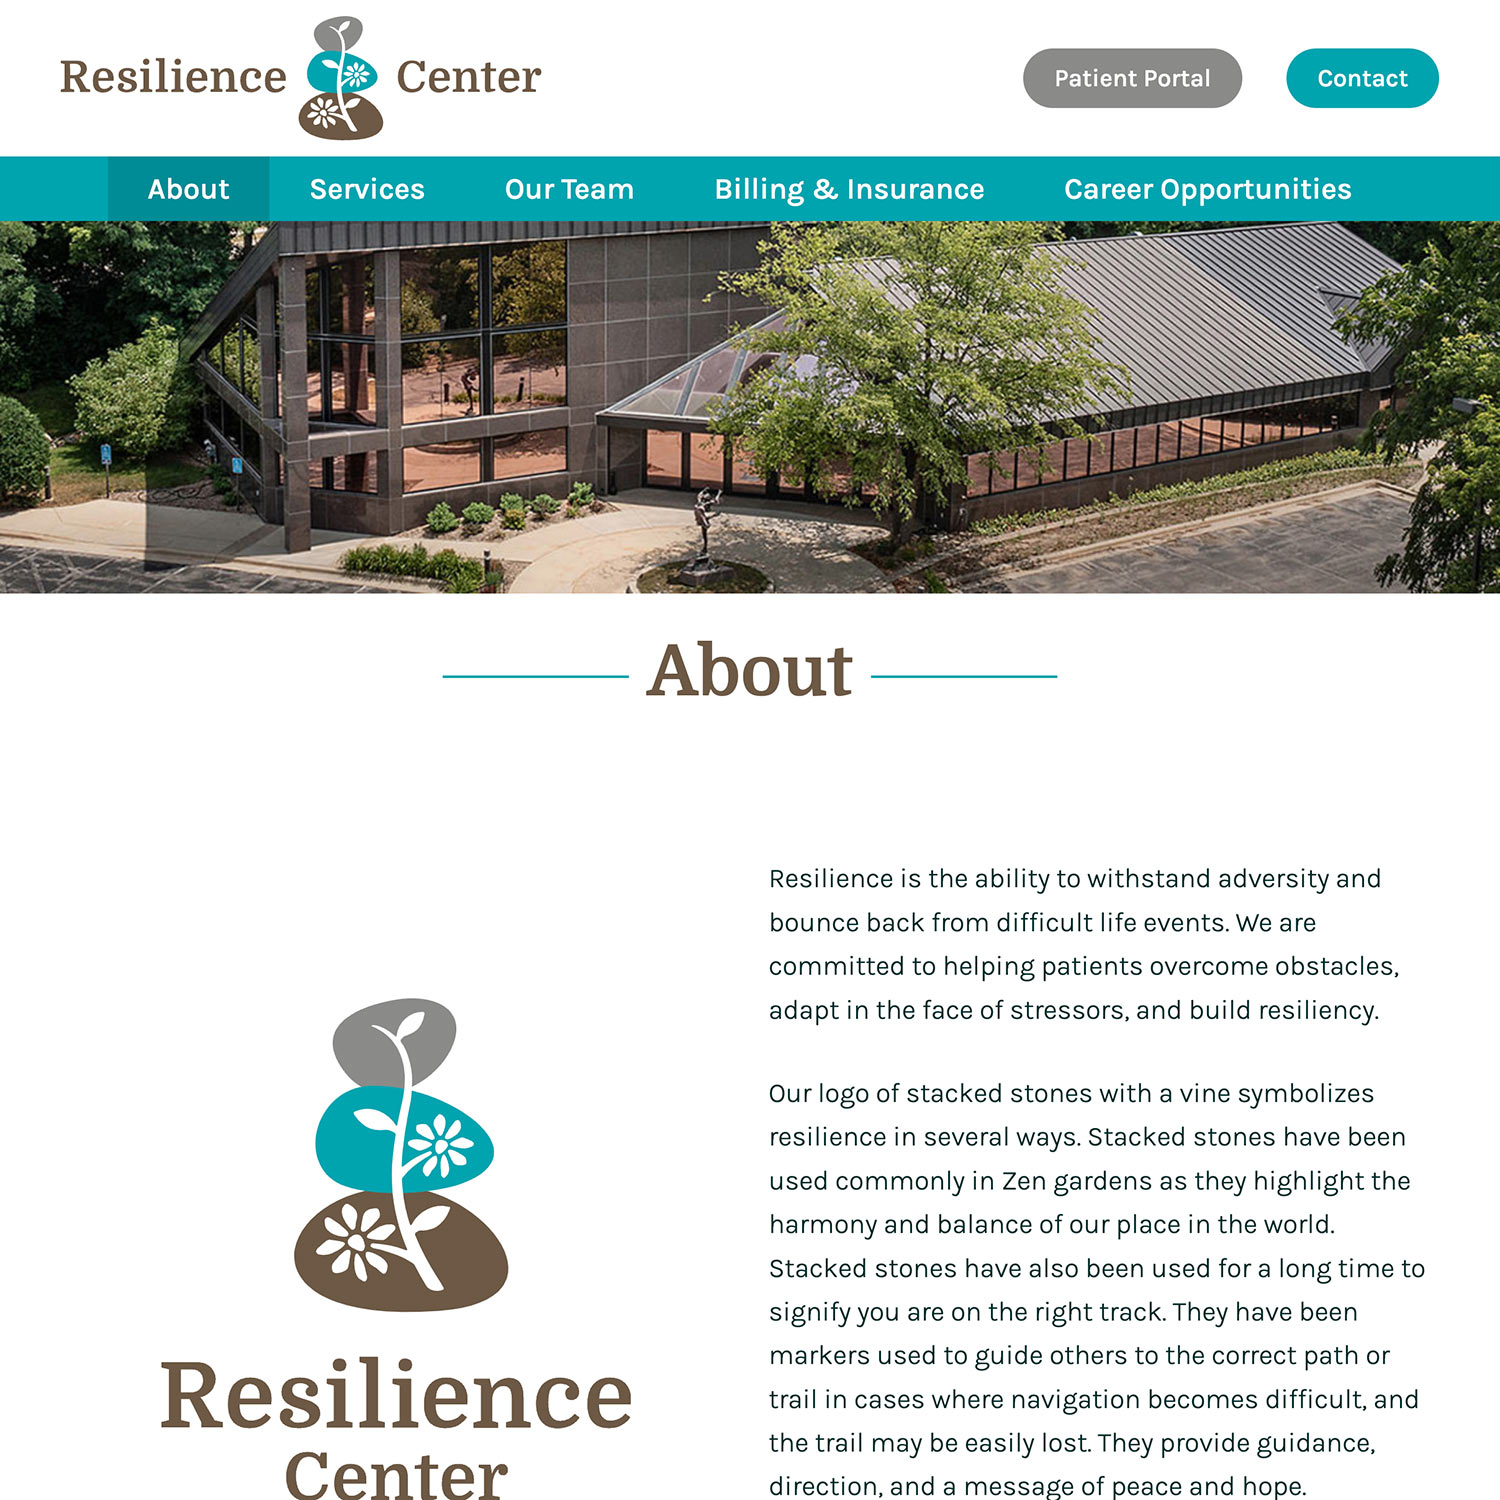 Resilience Center - About